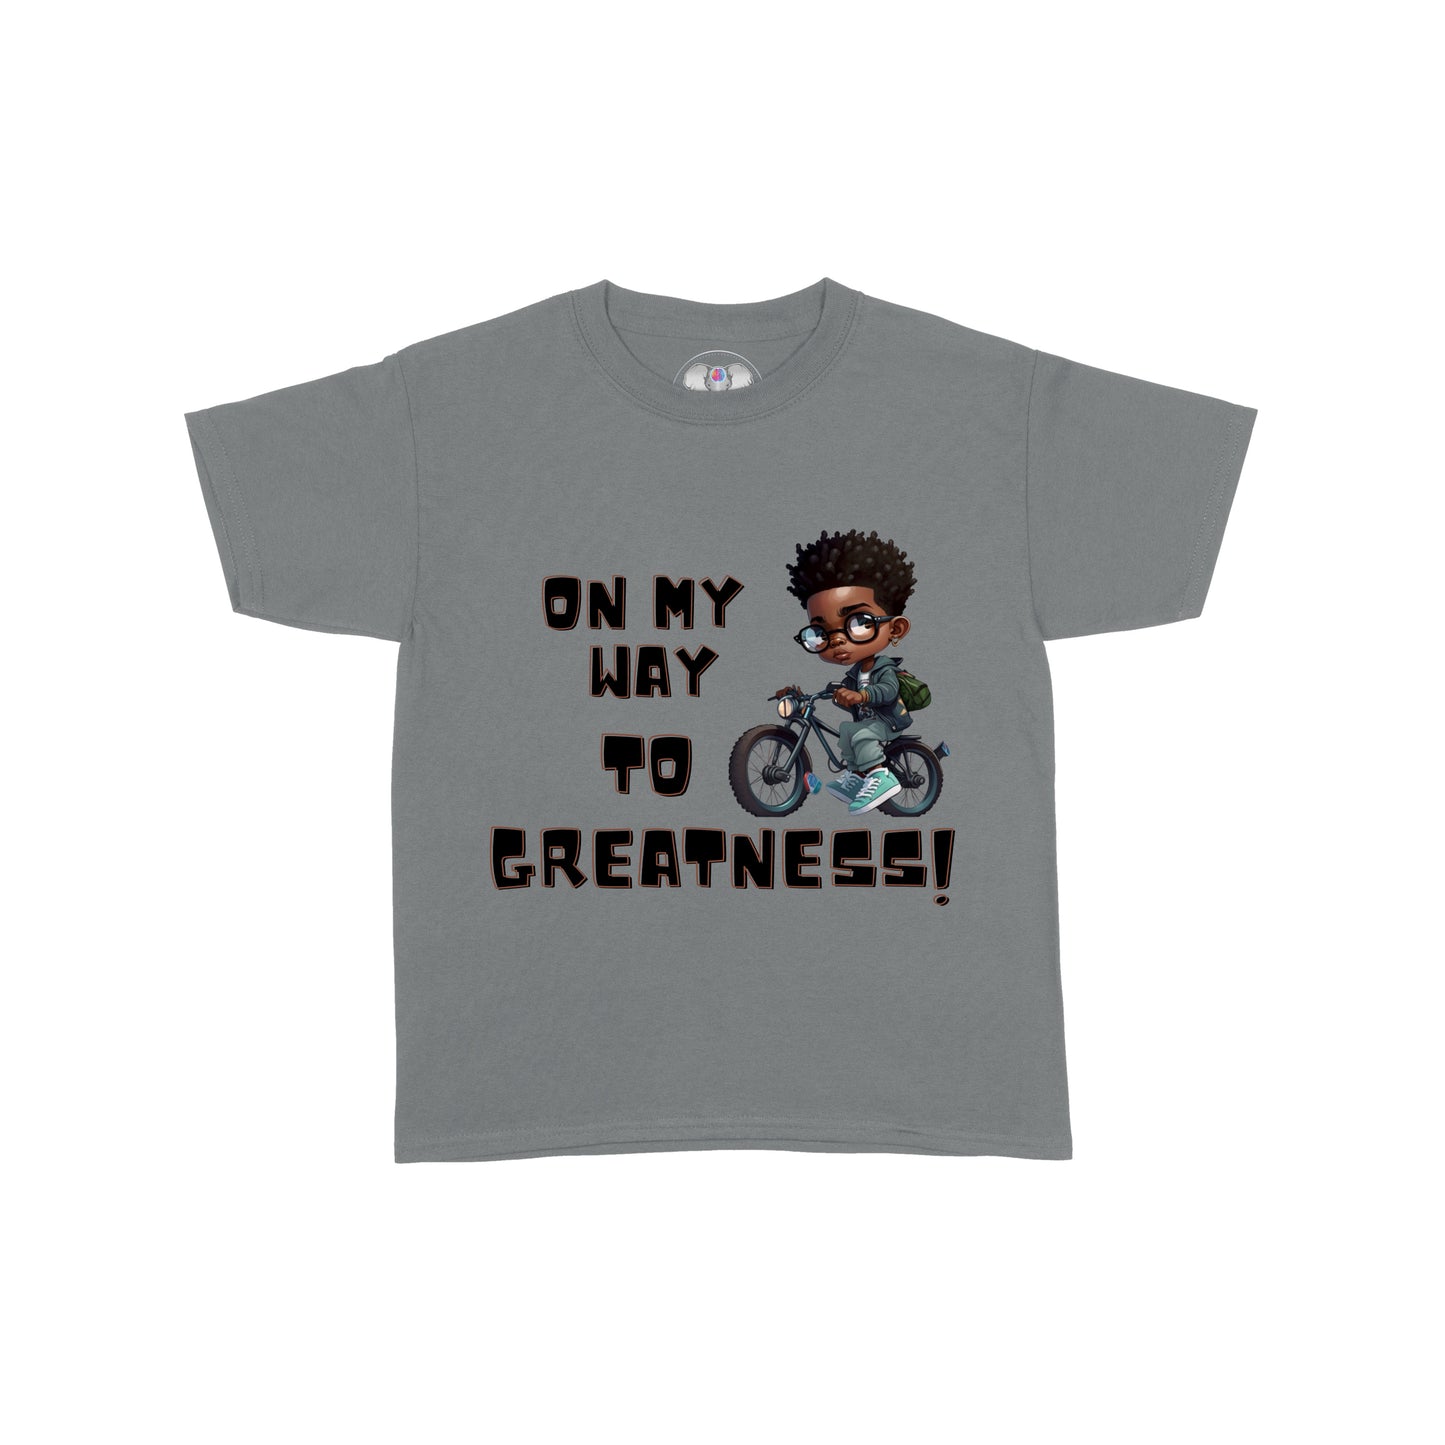 On My Way Greatness Graphic T-shirt